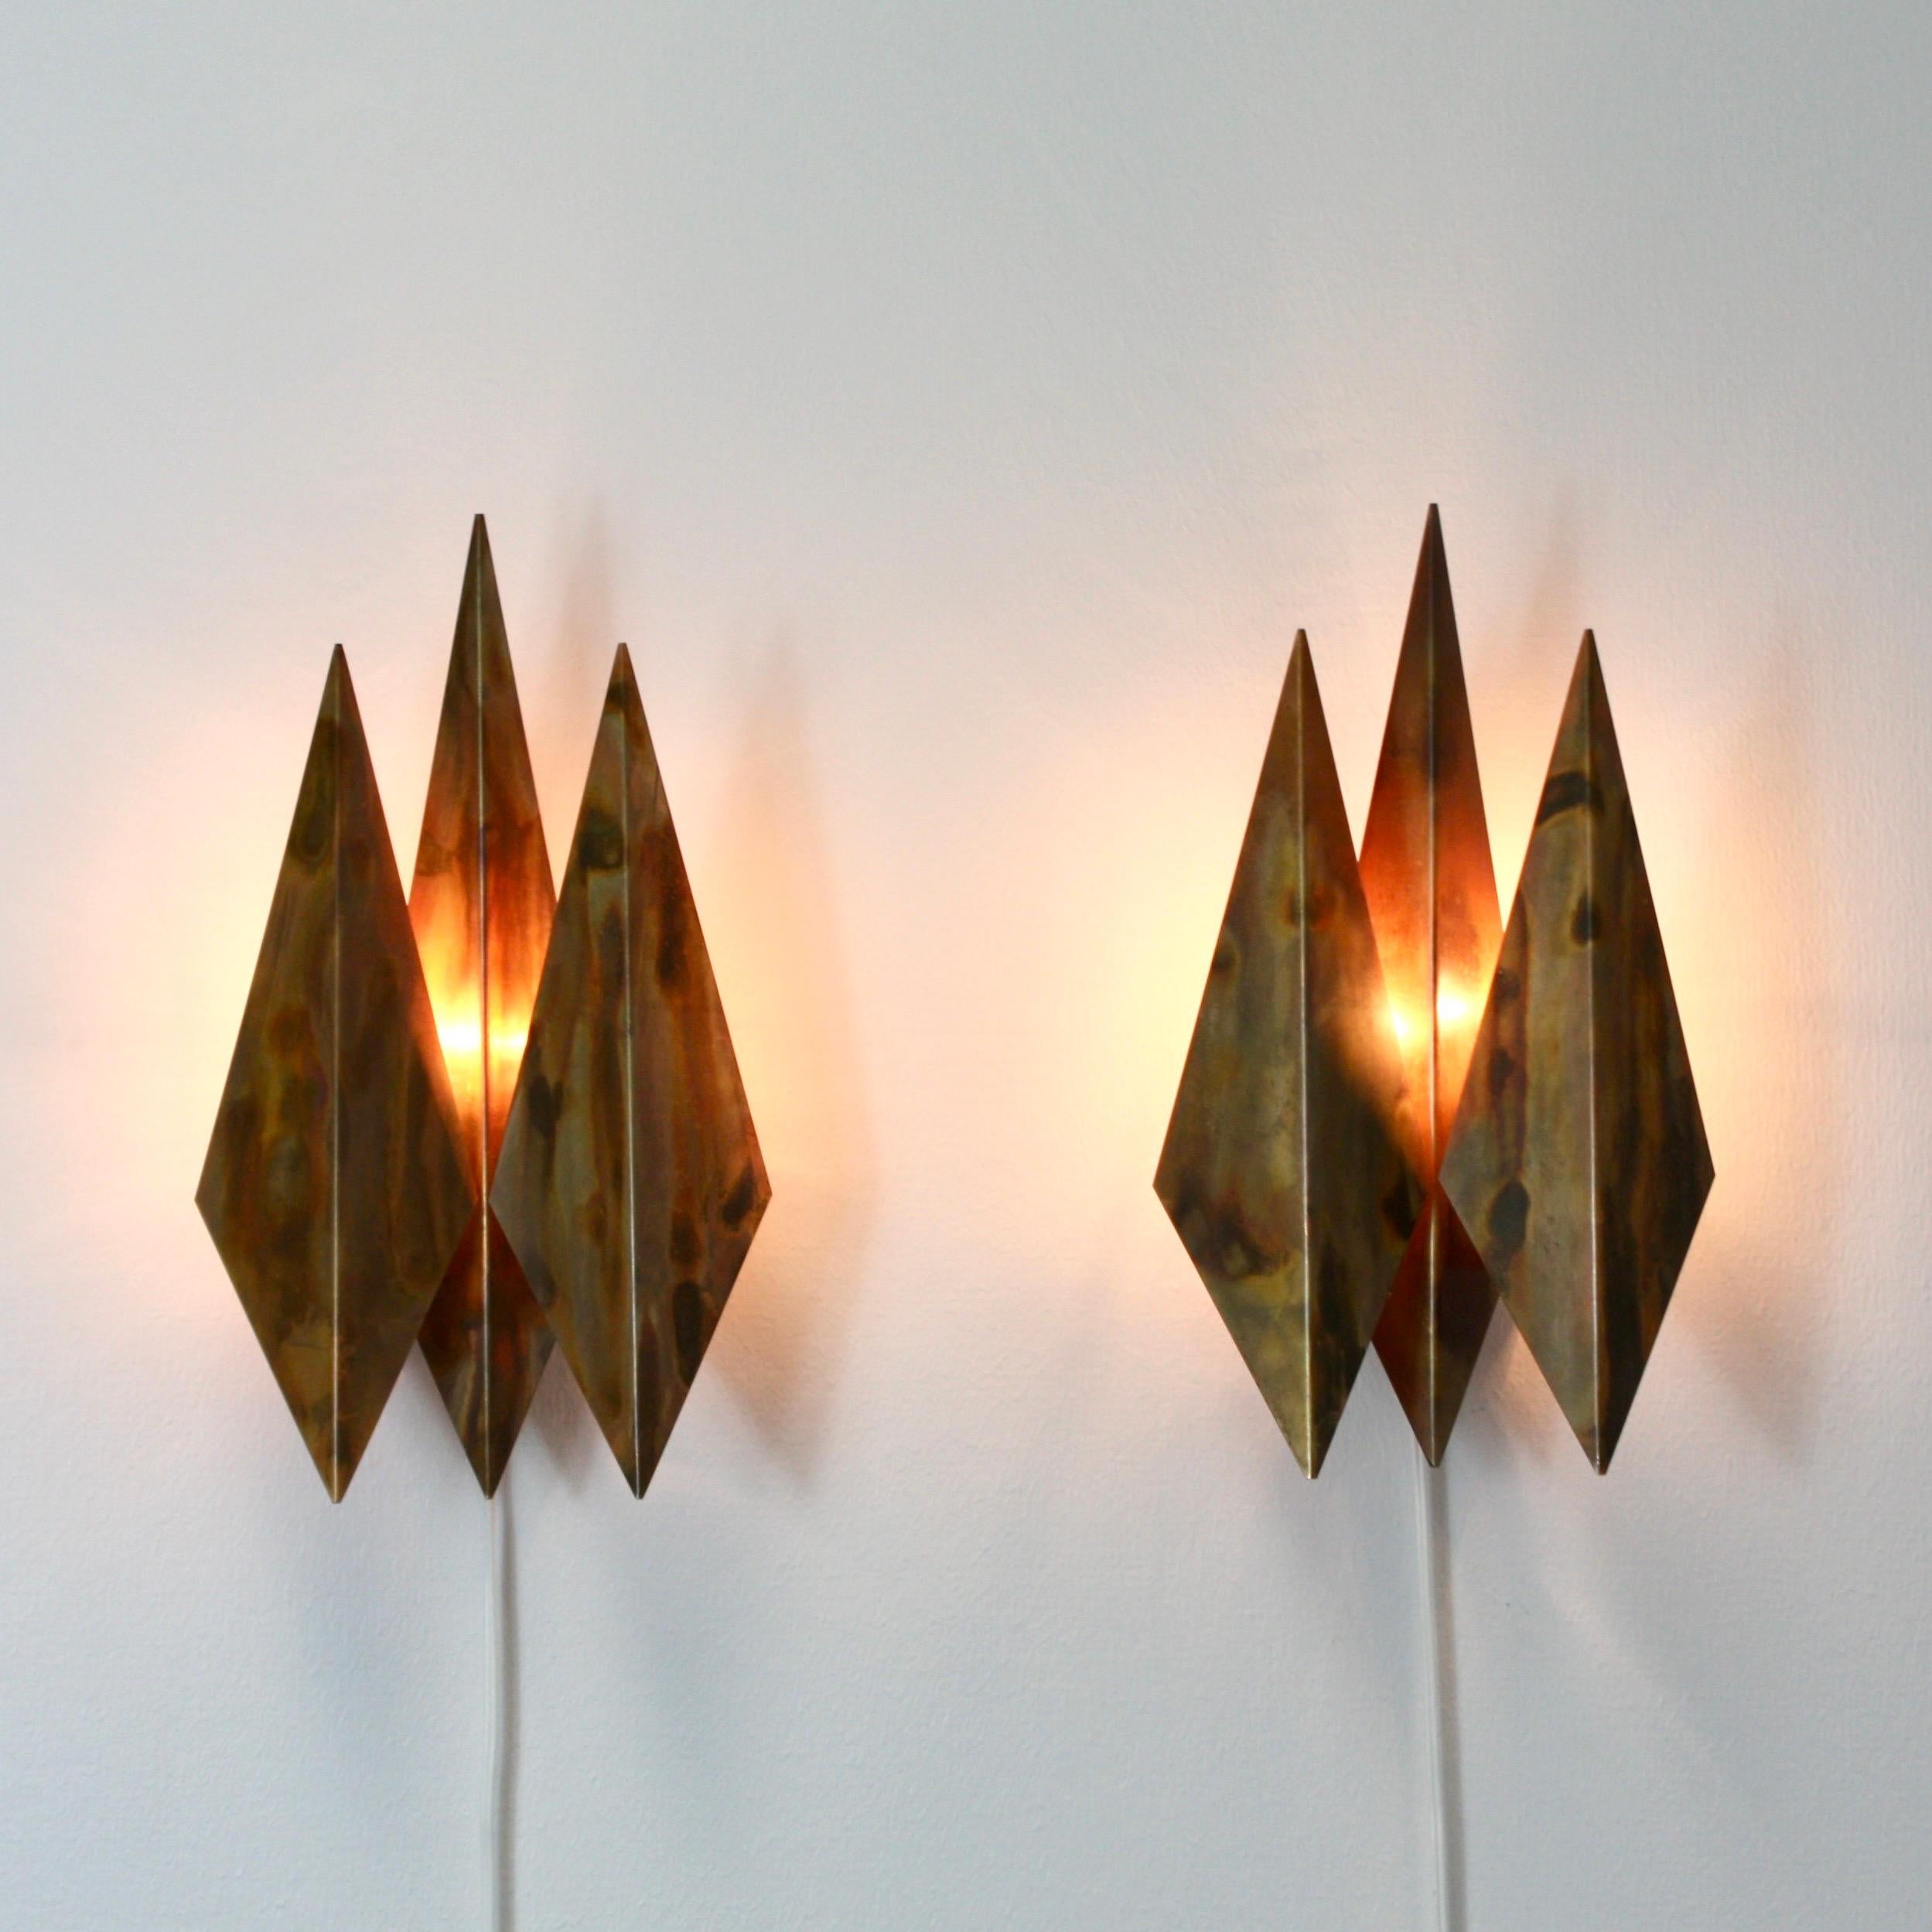 Danish Pair of Copper Wall Lamps by Svend Aage Holm Sorensen, 1960s, Denmark For Sale